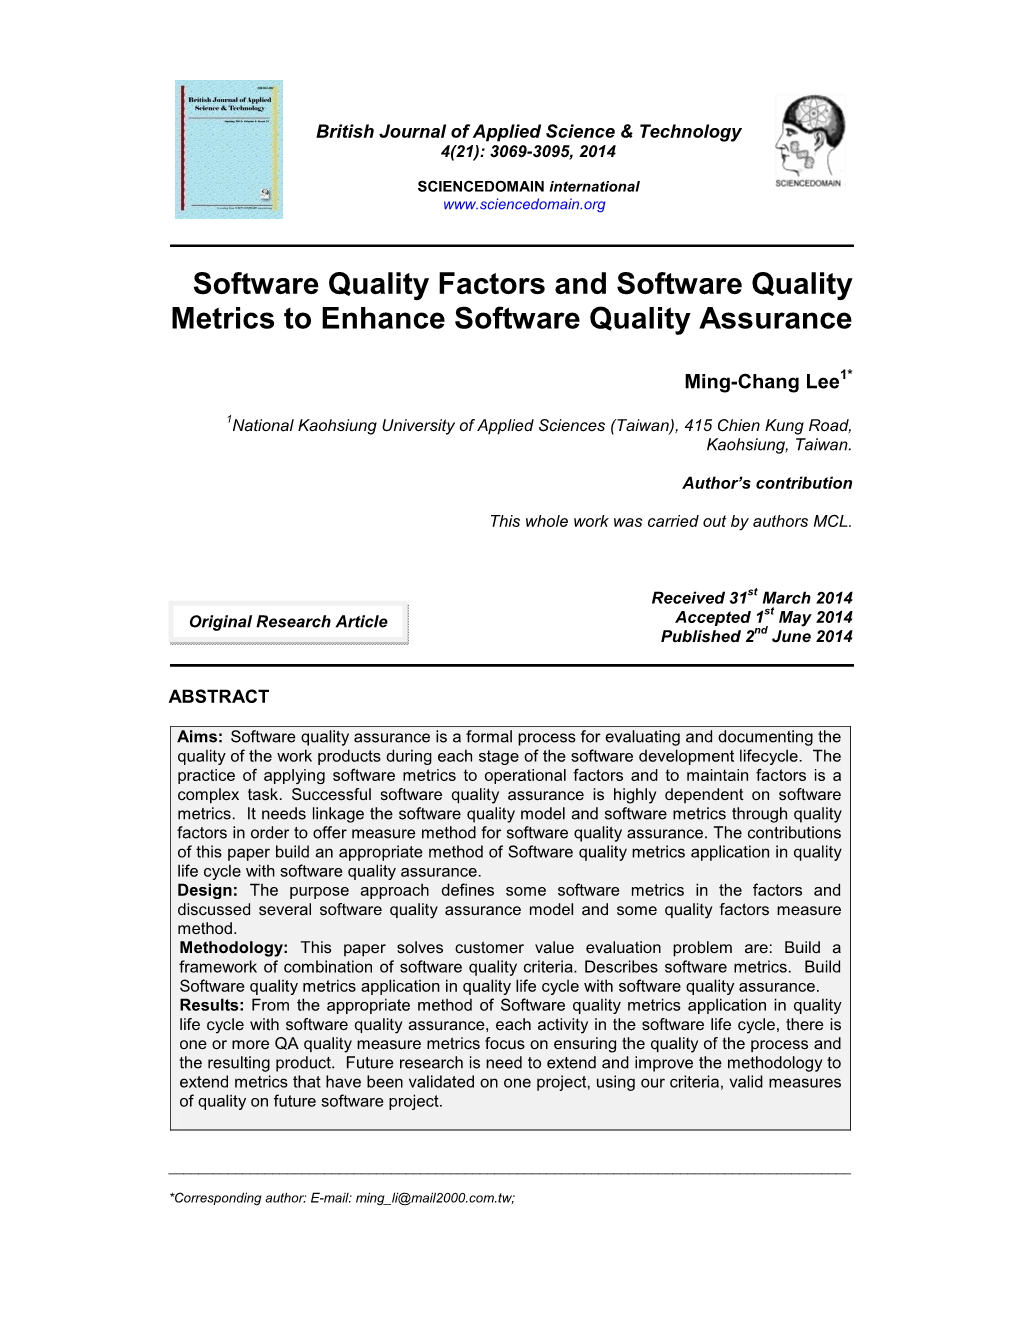 Software Quality Factors and Software Quality Metrics to Enhance Software Quality Assurance